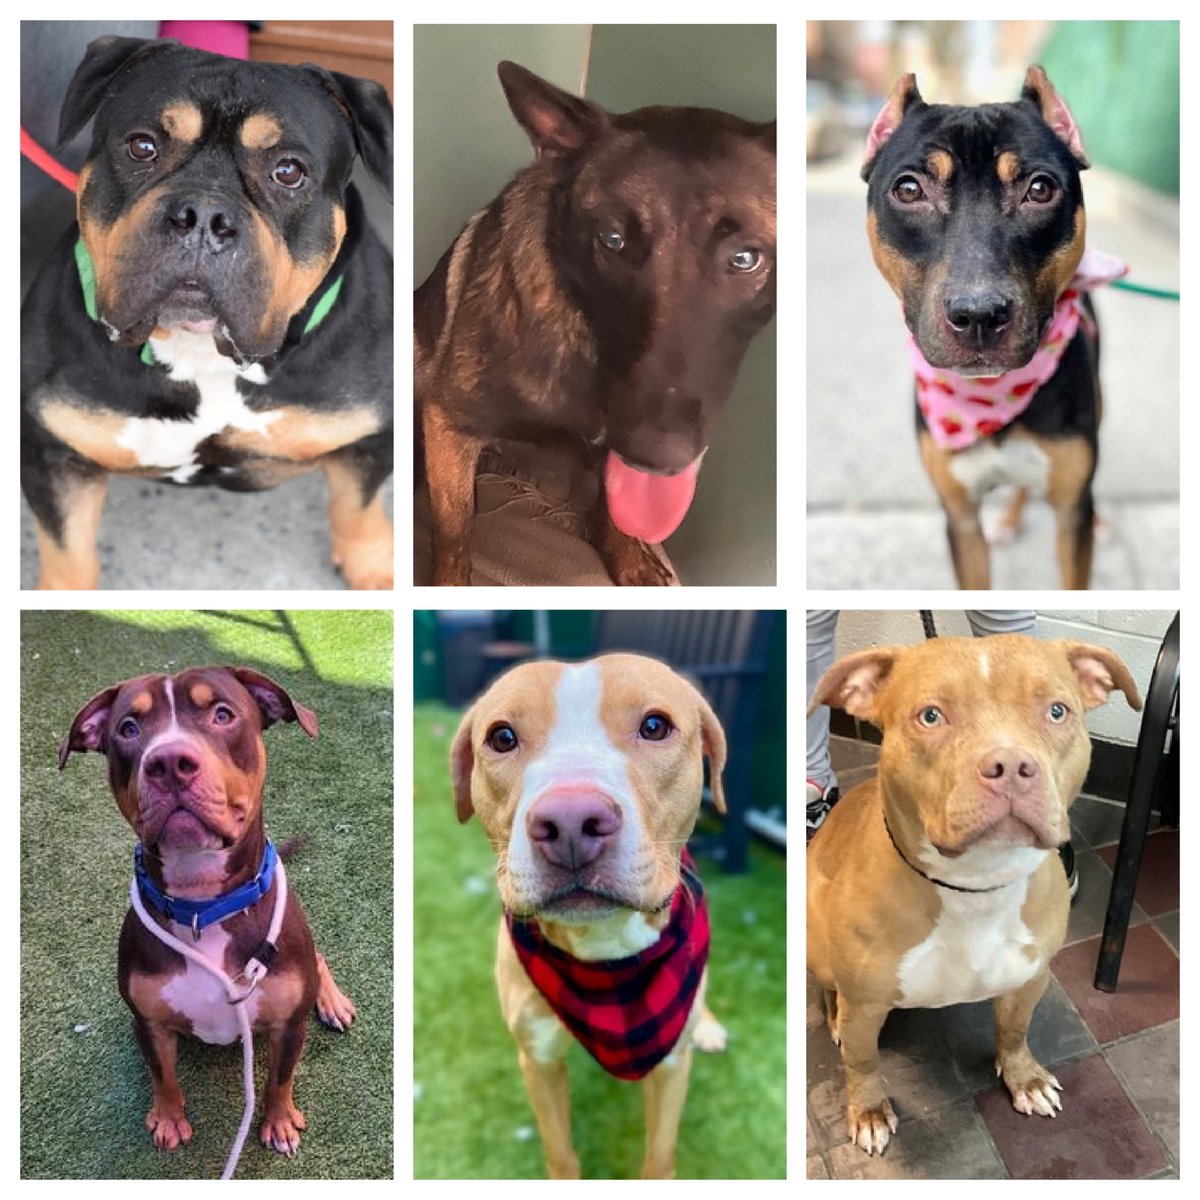 NYCACC's hit list comprises 16 dogs TBK Tuesday, five of those are new to the list. Spark's adoption has fallen through and he's back, plus DELISTED Maximo, Lady, Jigglypuff and Cobain who are in great need. Please help us: repost/share and pledge if you're able, email…